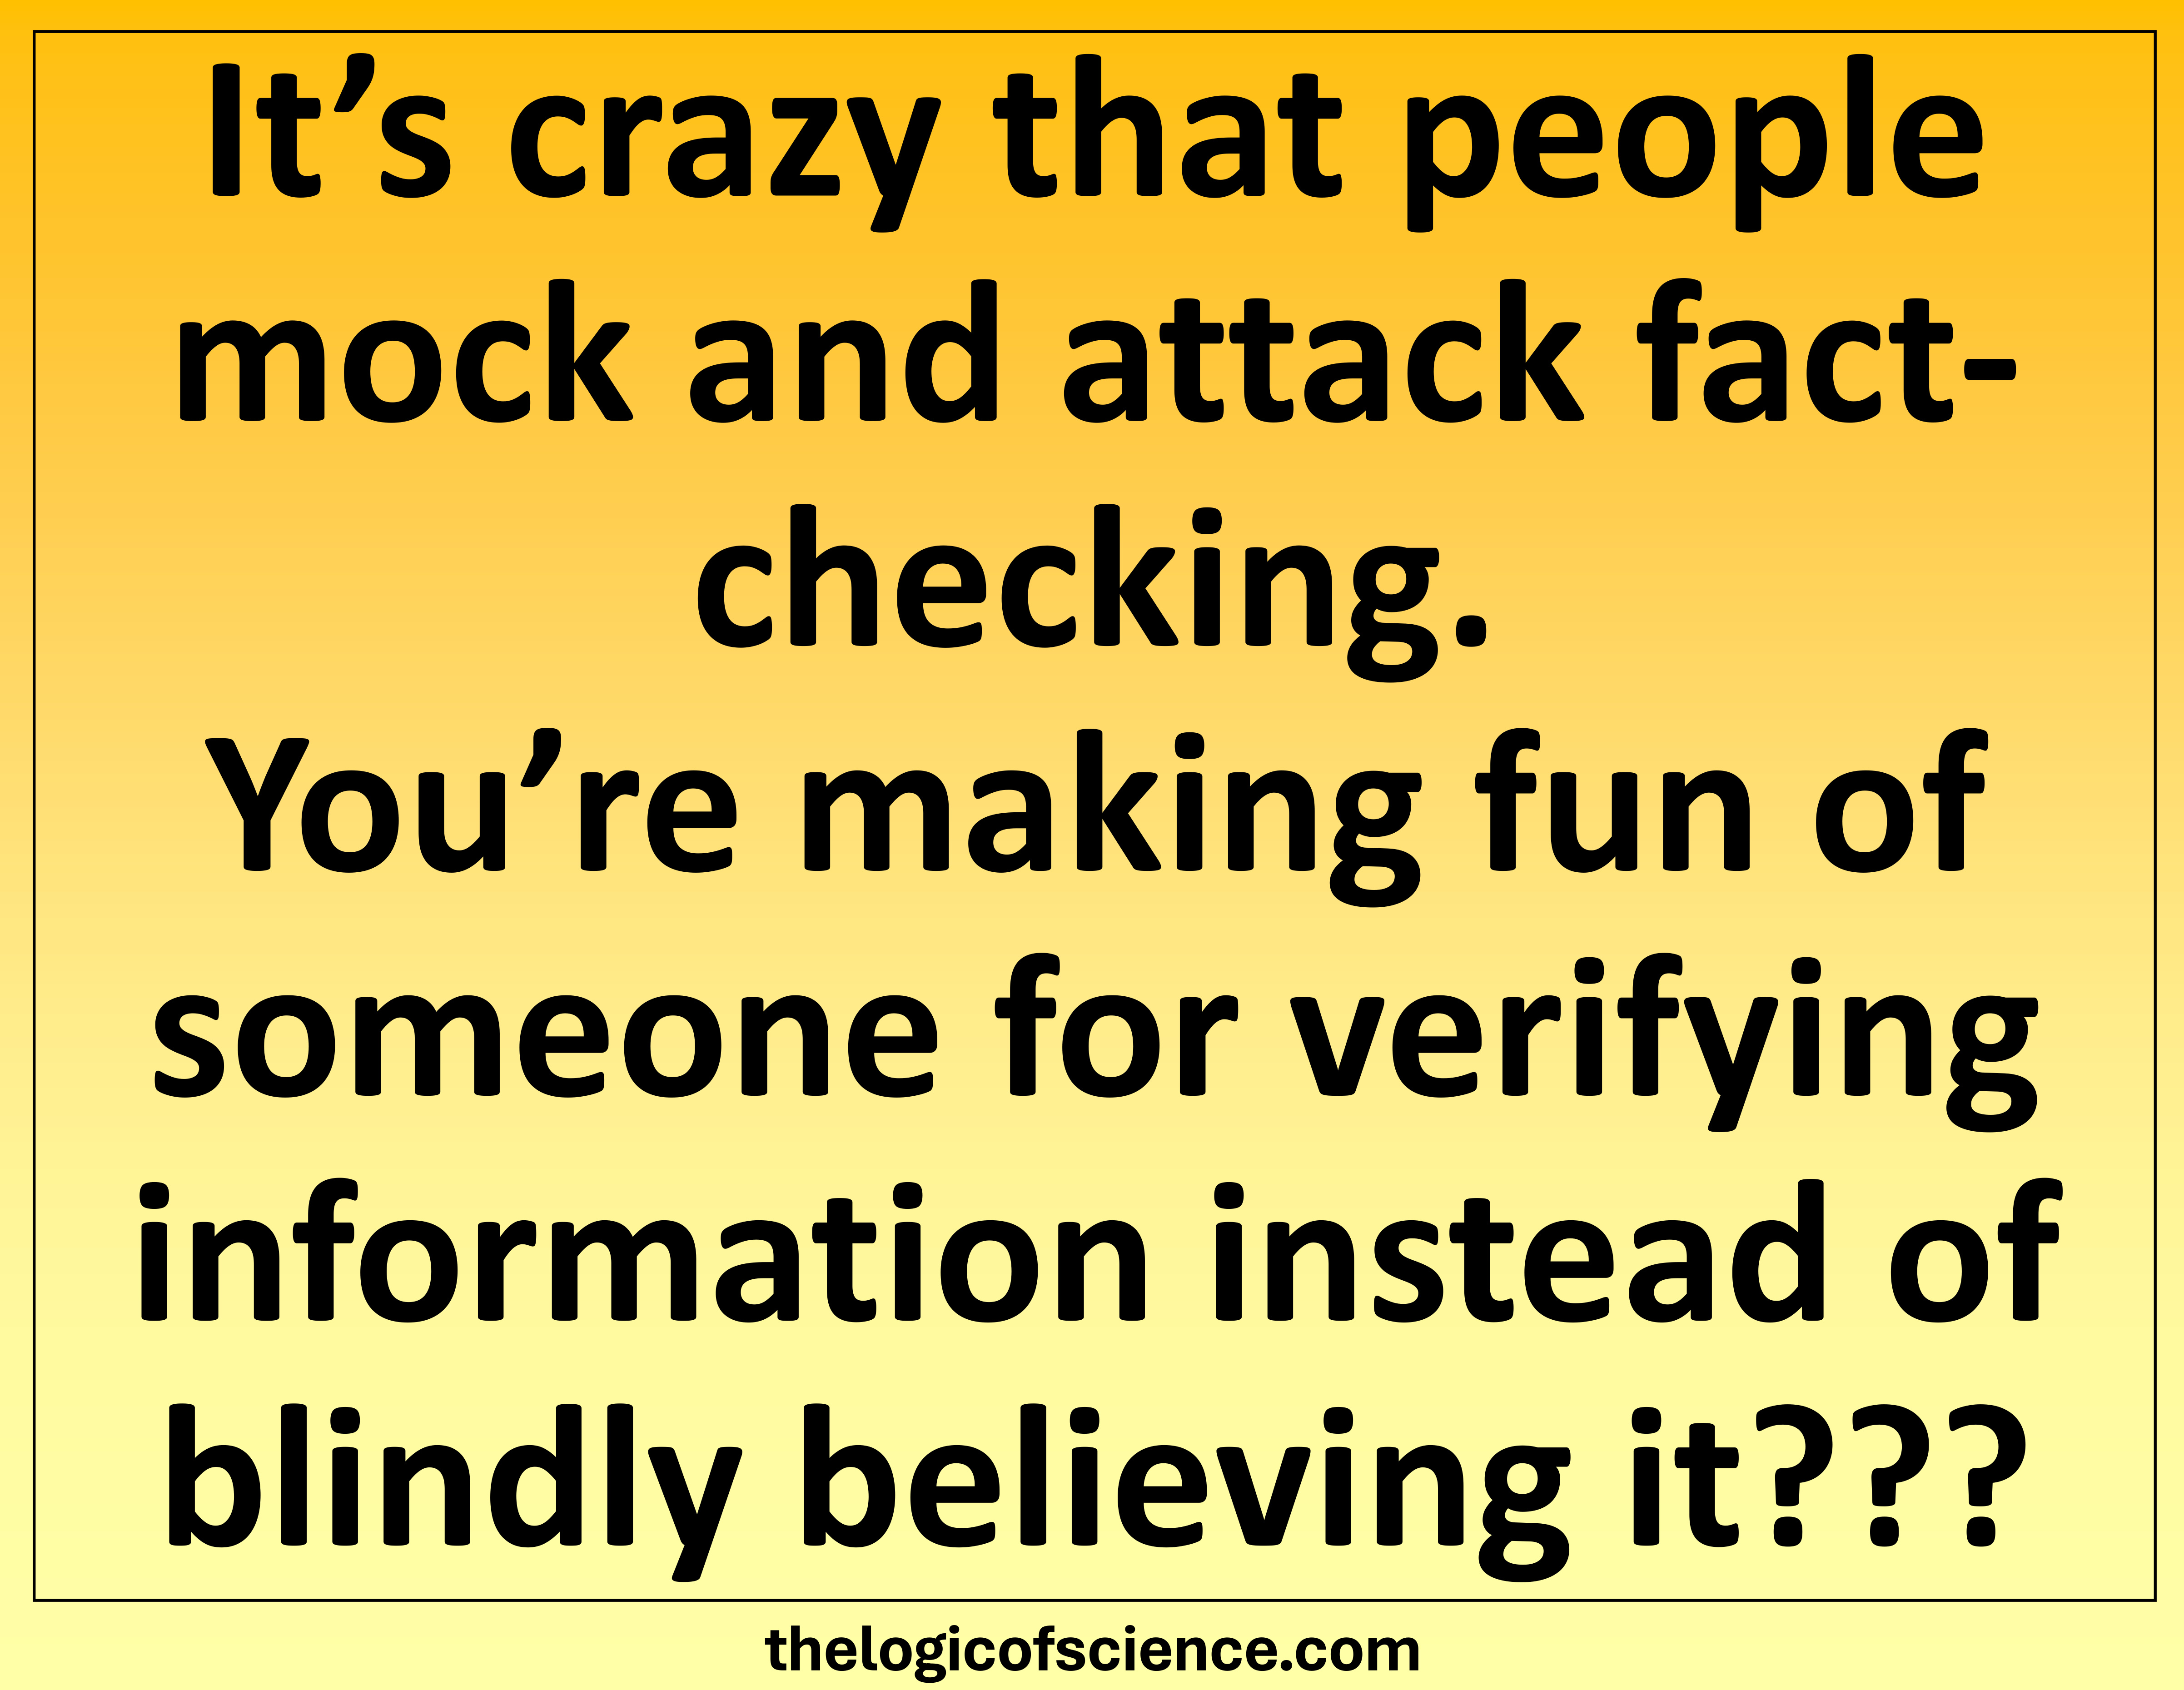 fact-checking, facts, checking, fact, missinformation